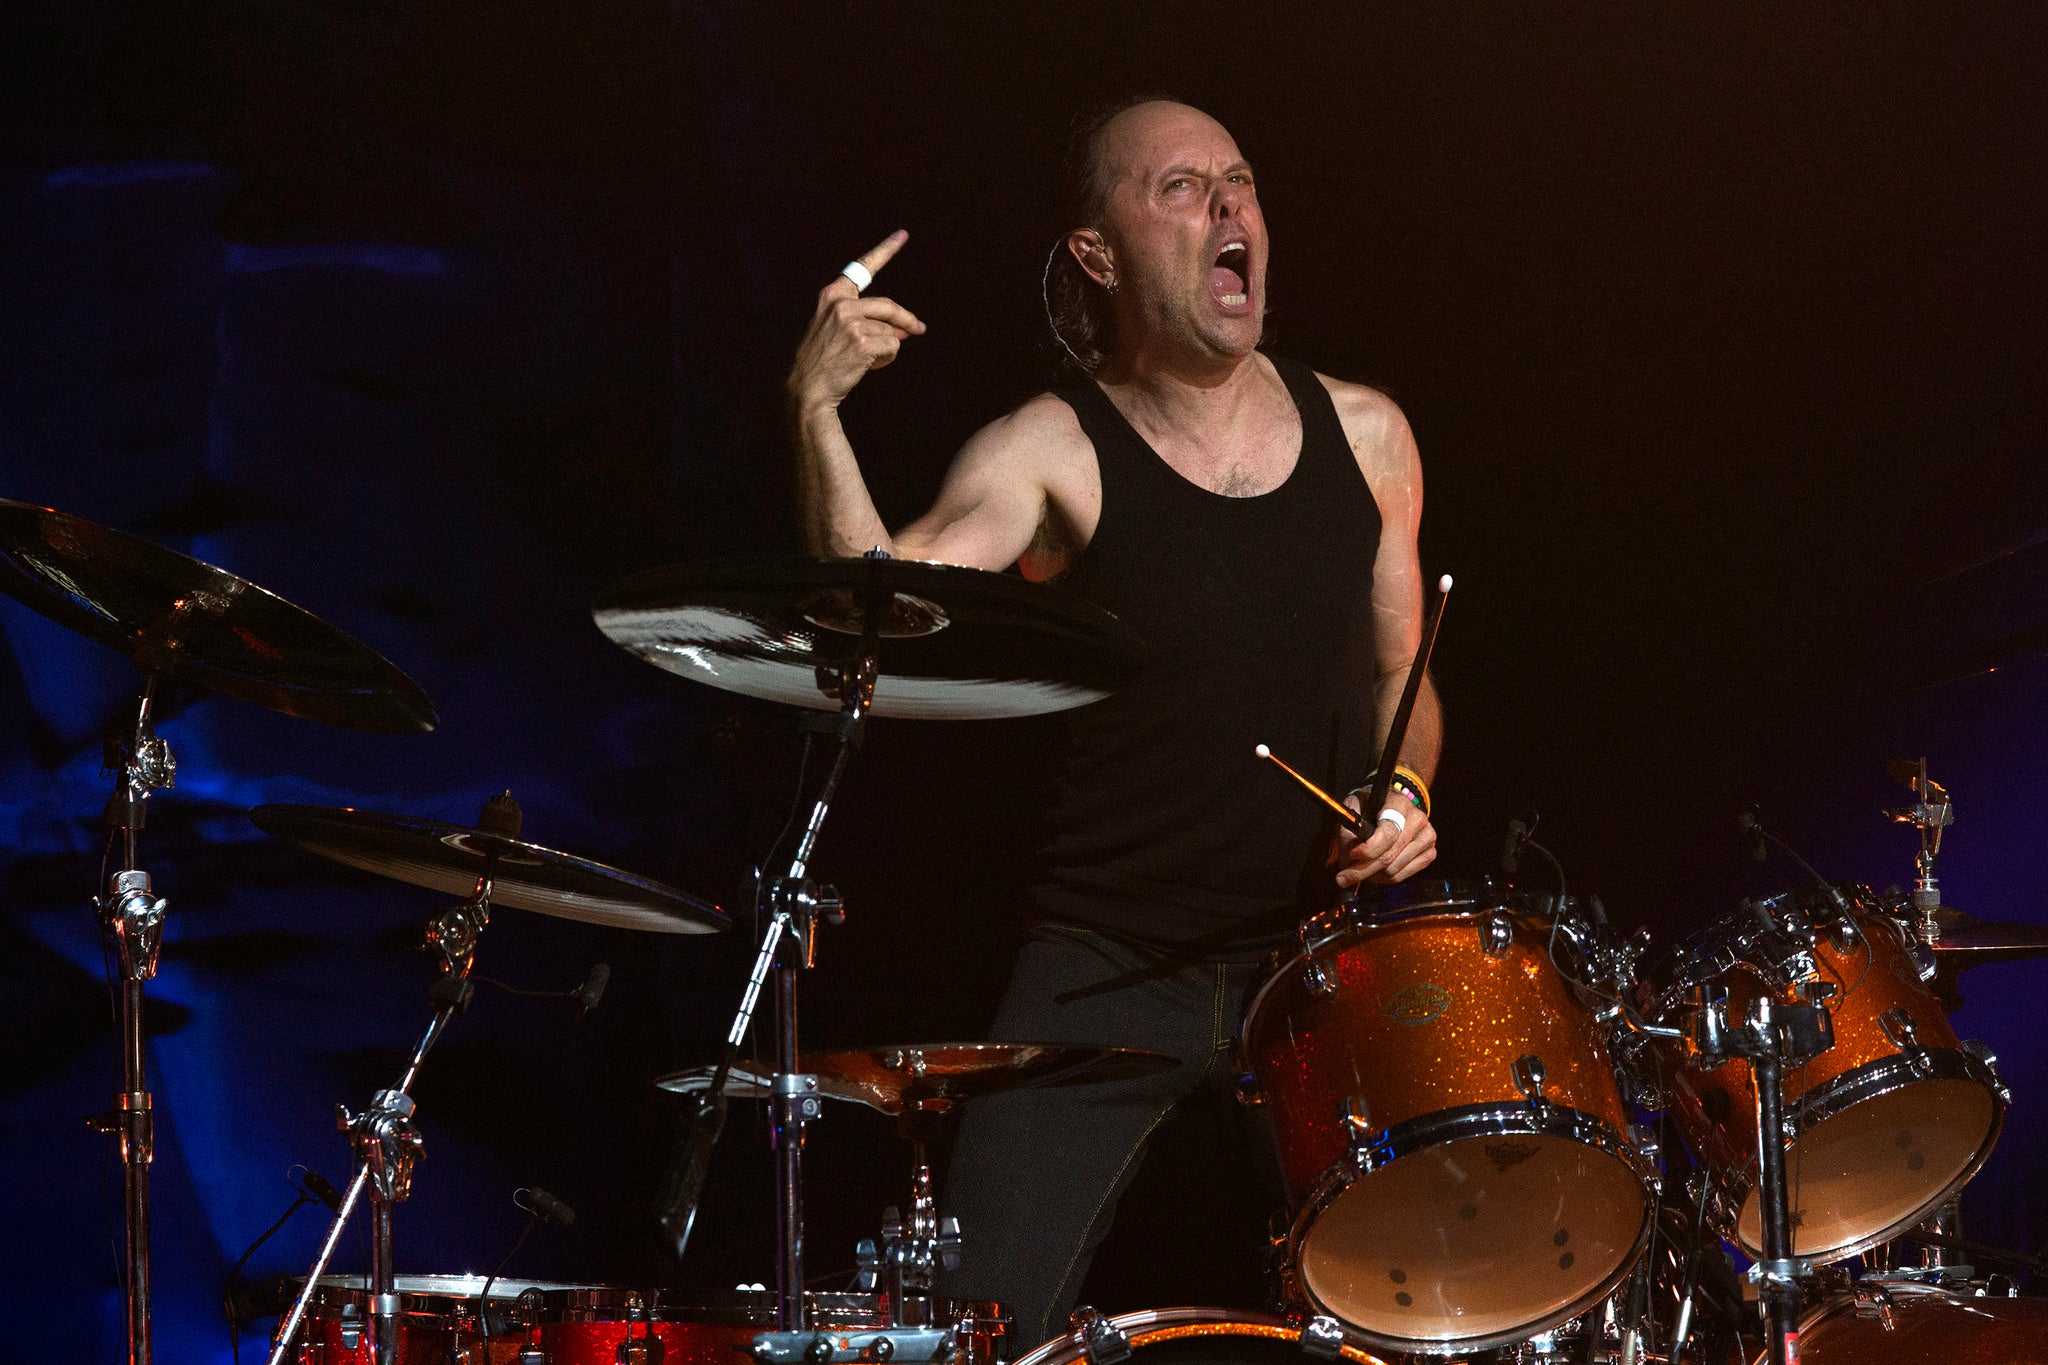 Lars Ulrich, drummer with Metallica, says staying sober at festivals is a 'downside'